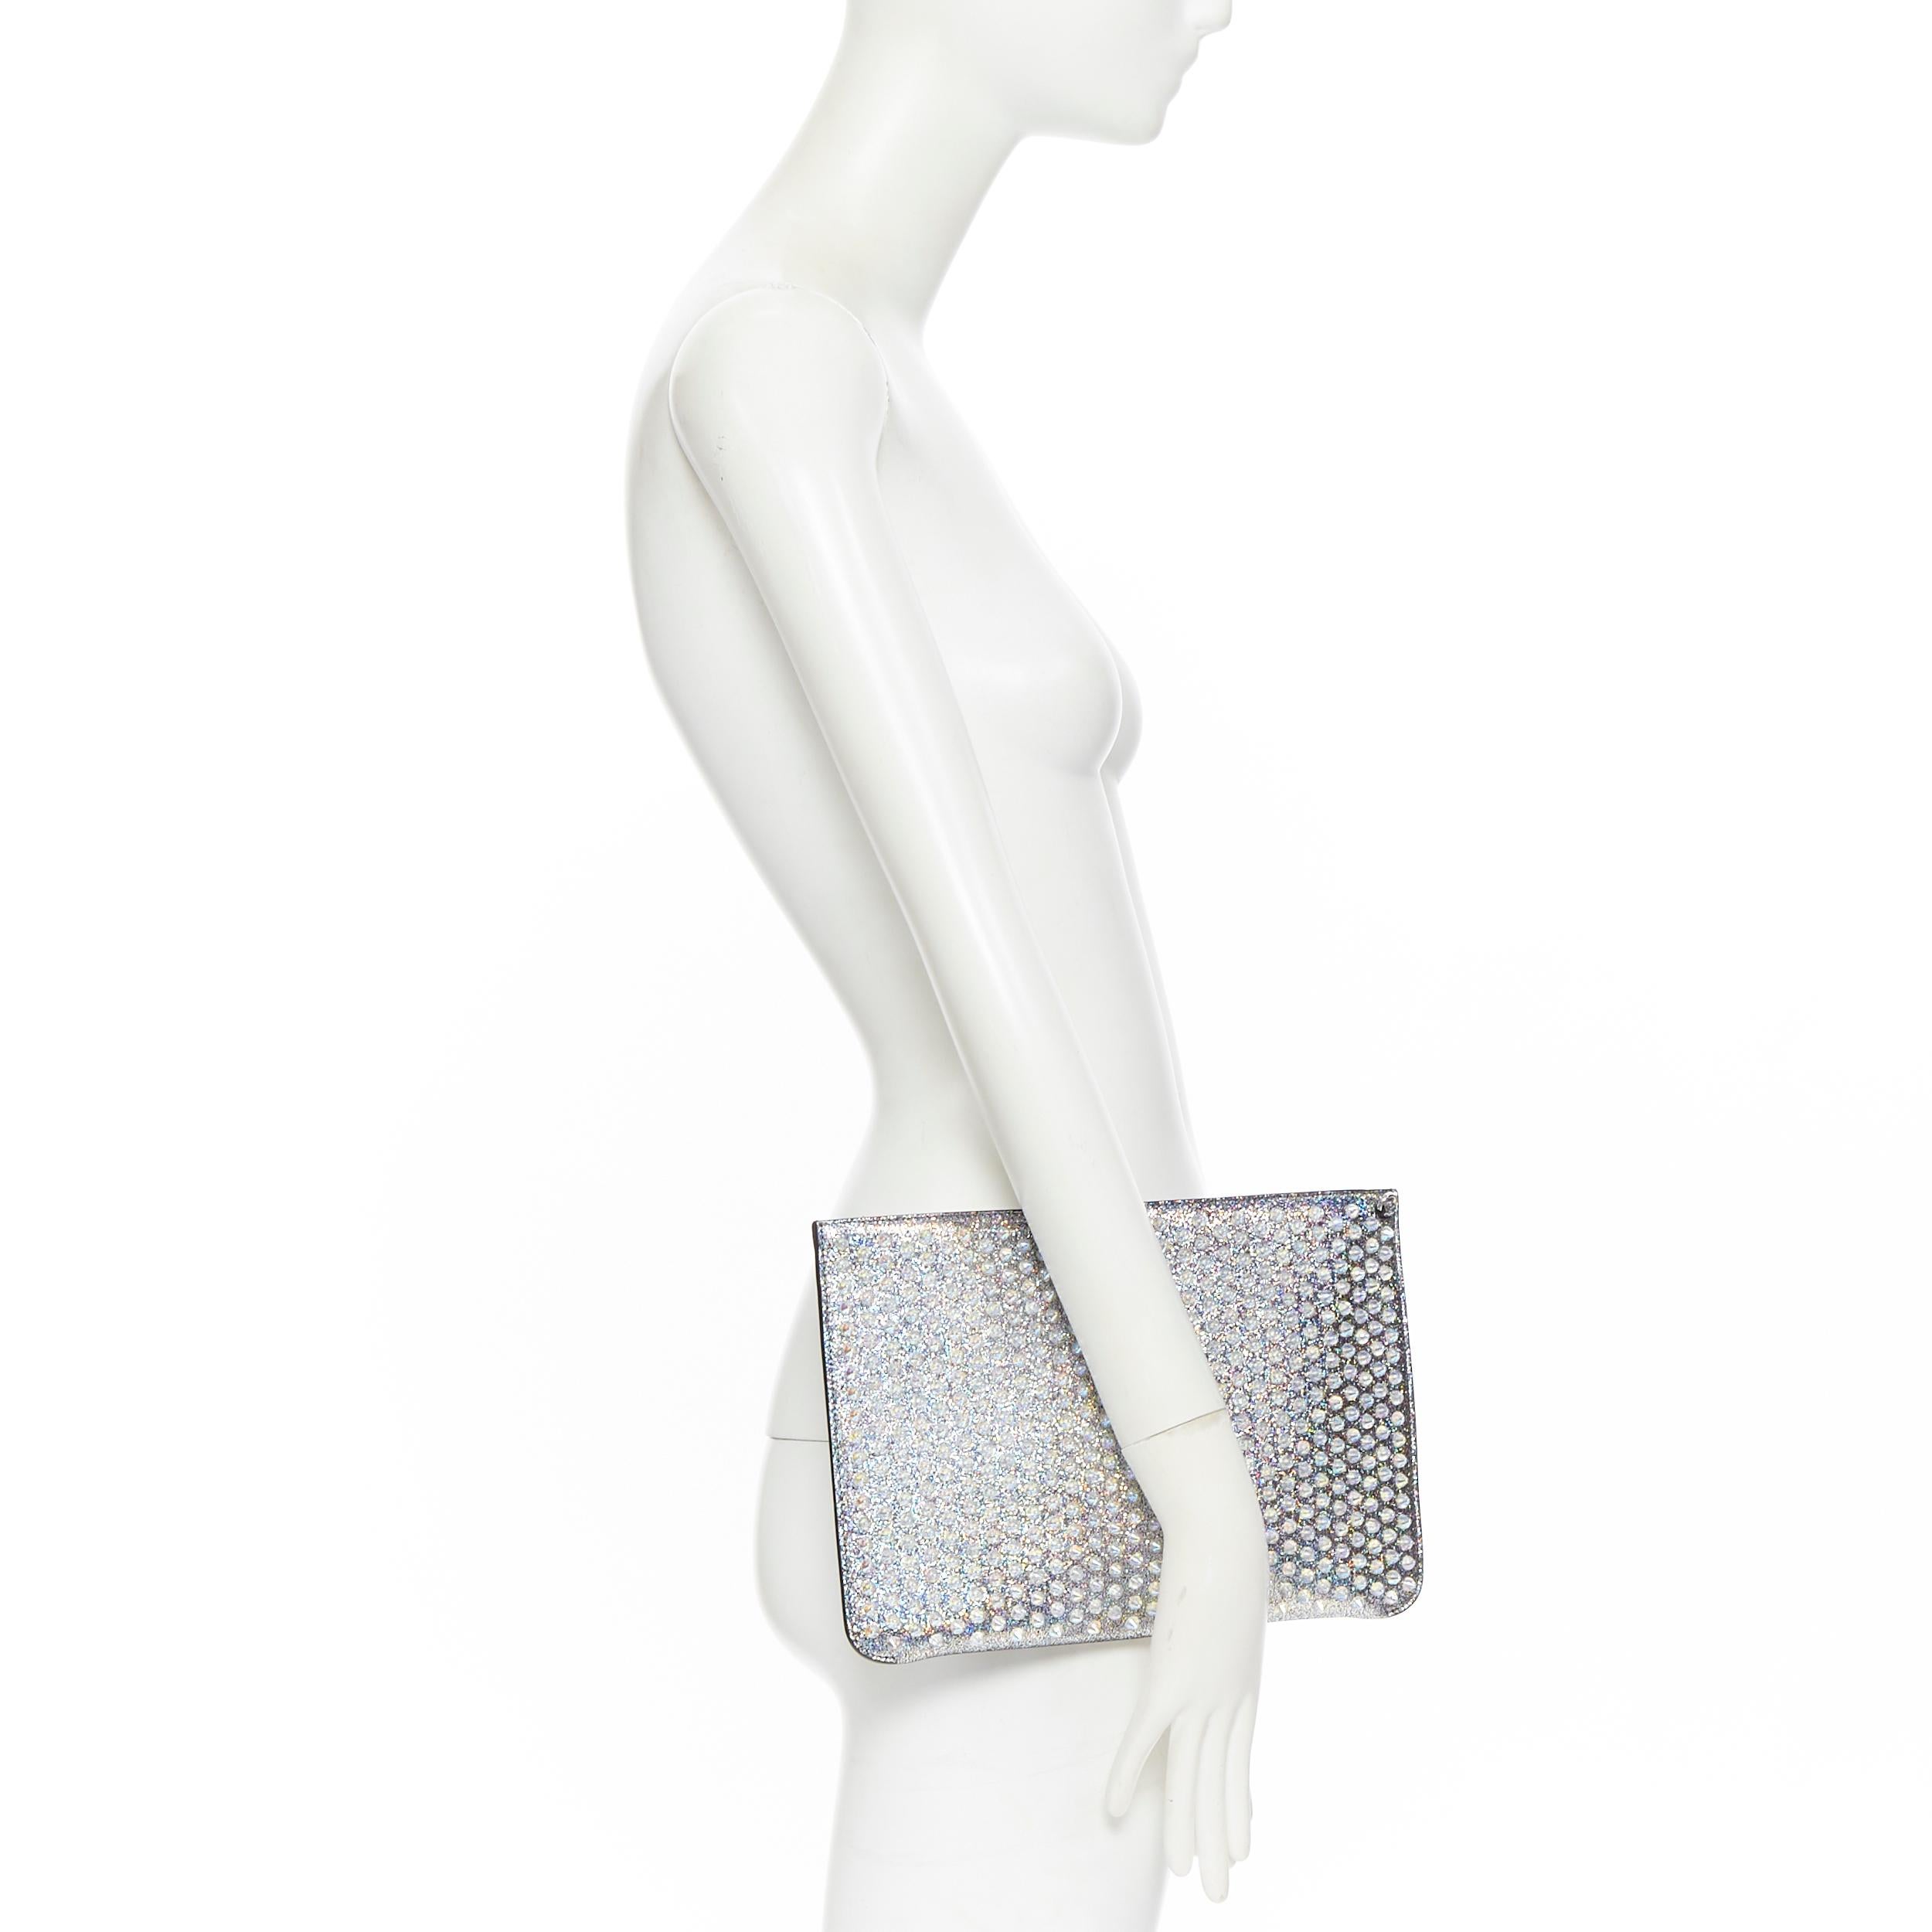 new CHRISTIAN LOUBOUTIN Loubiclutch iridescent silver spike stud zip clutch bag
Brand: Christian Louboutin
Designer: Christian Louboutin
Model Name / Style: Loubiclutch
Material: Leather
Color: Silver
Pattern: Solid
Extra Detail: Holographic silver